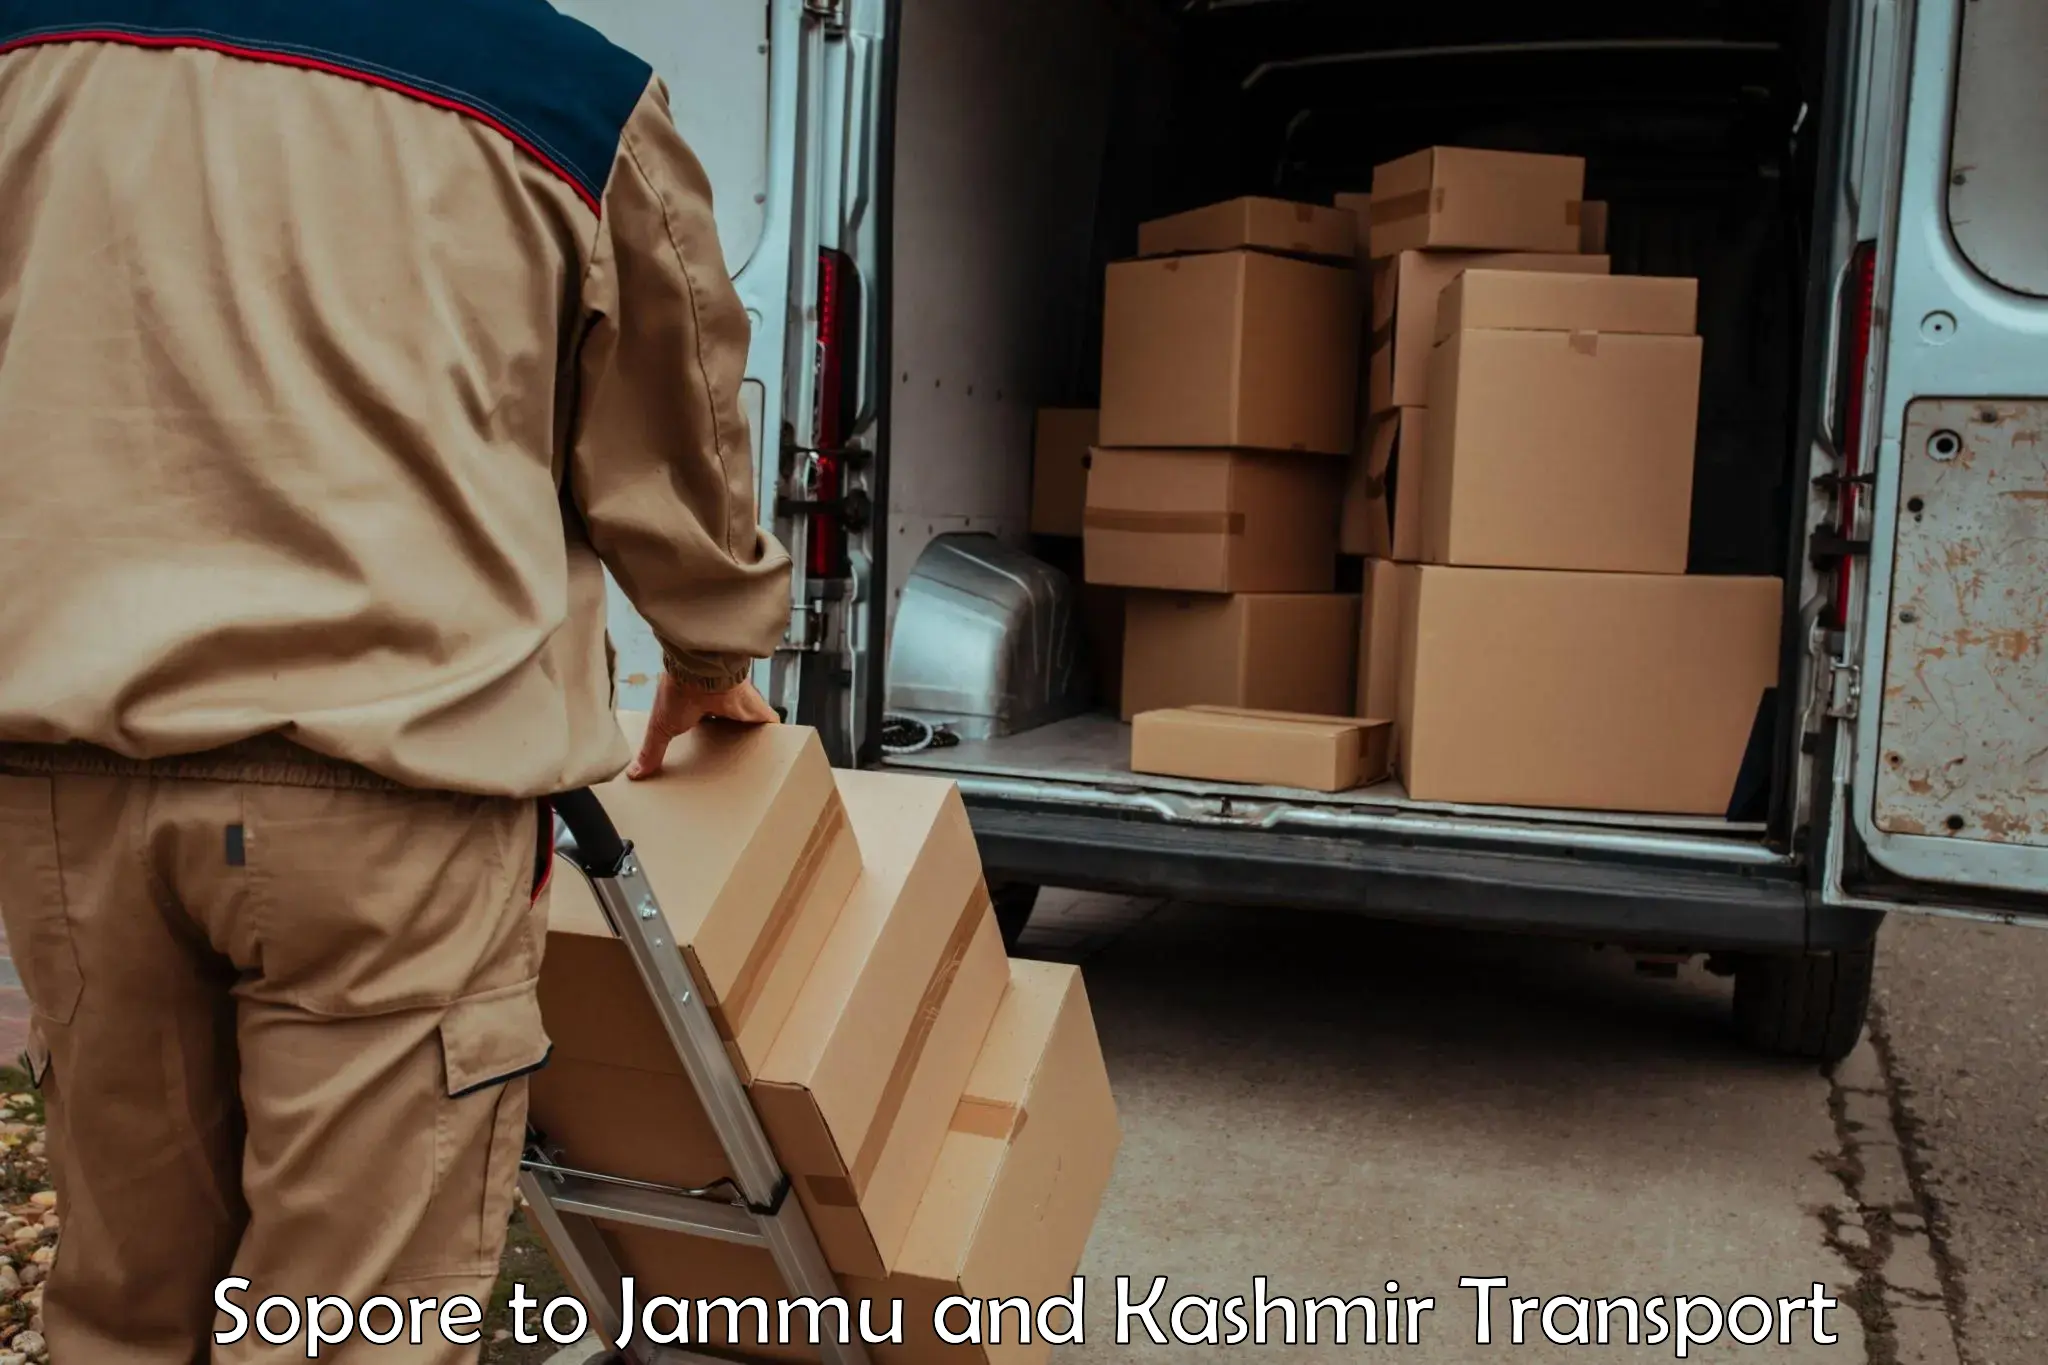 Daily parcel service transport Sopore to IIT Jammu